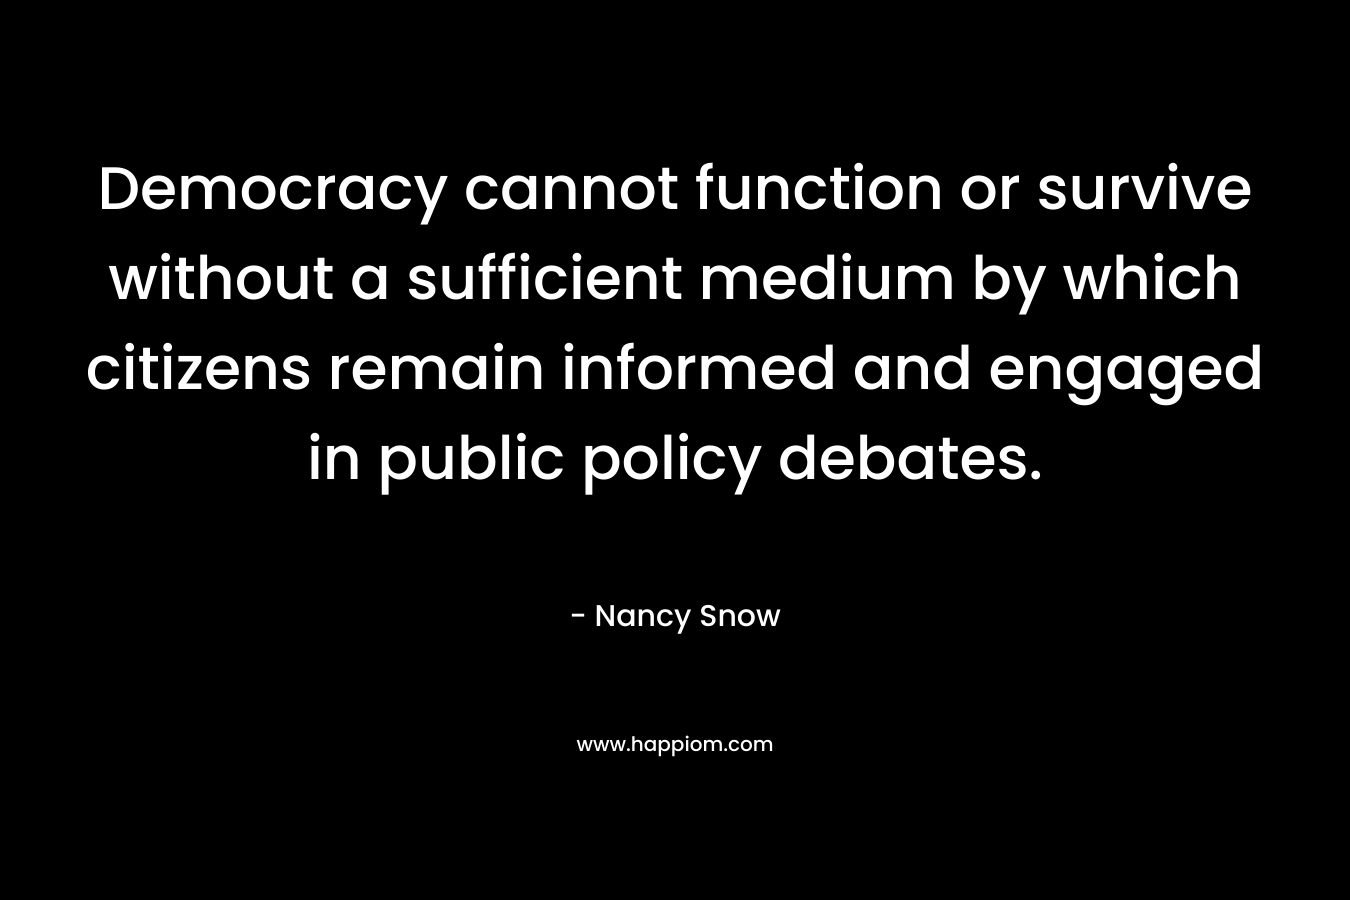 Democracy cannot function or survive without a sufficient medium by which citizens remain informed and engaged in public policy debates. – Nancy Snow